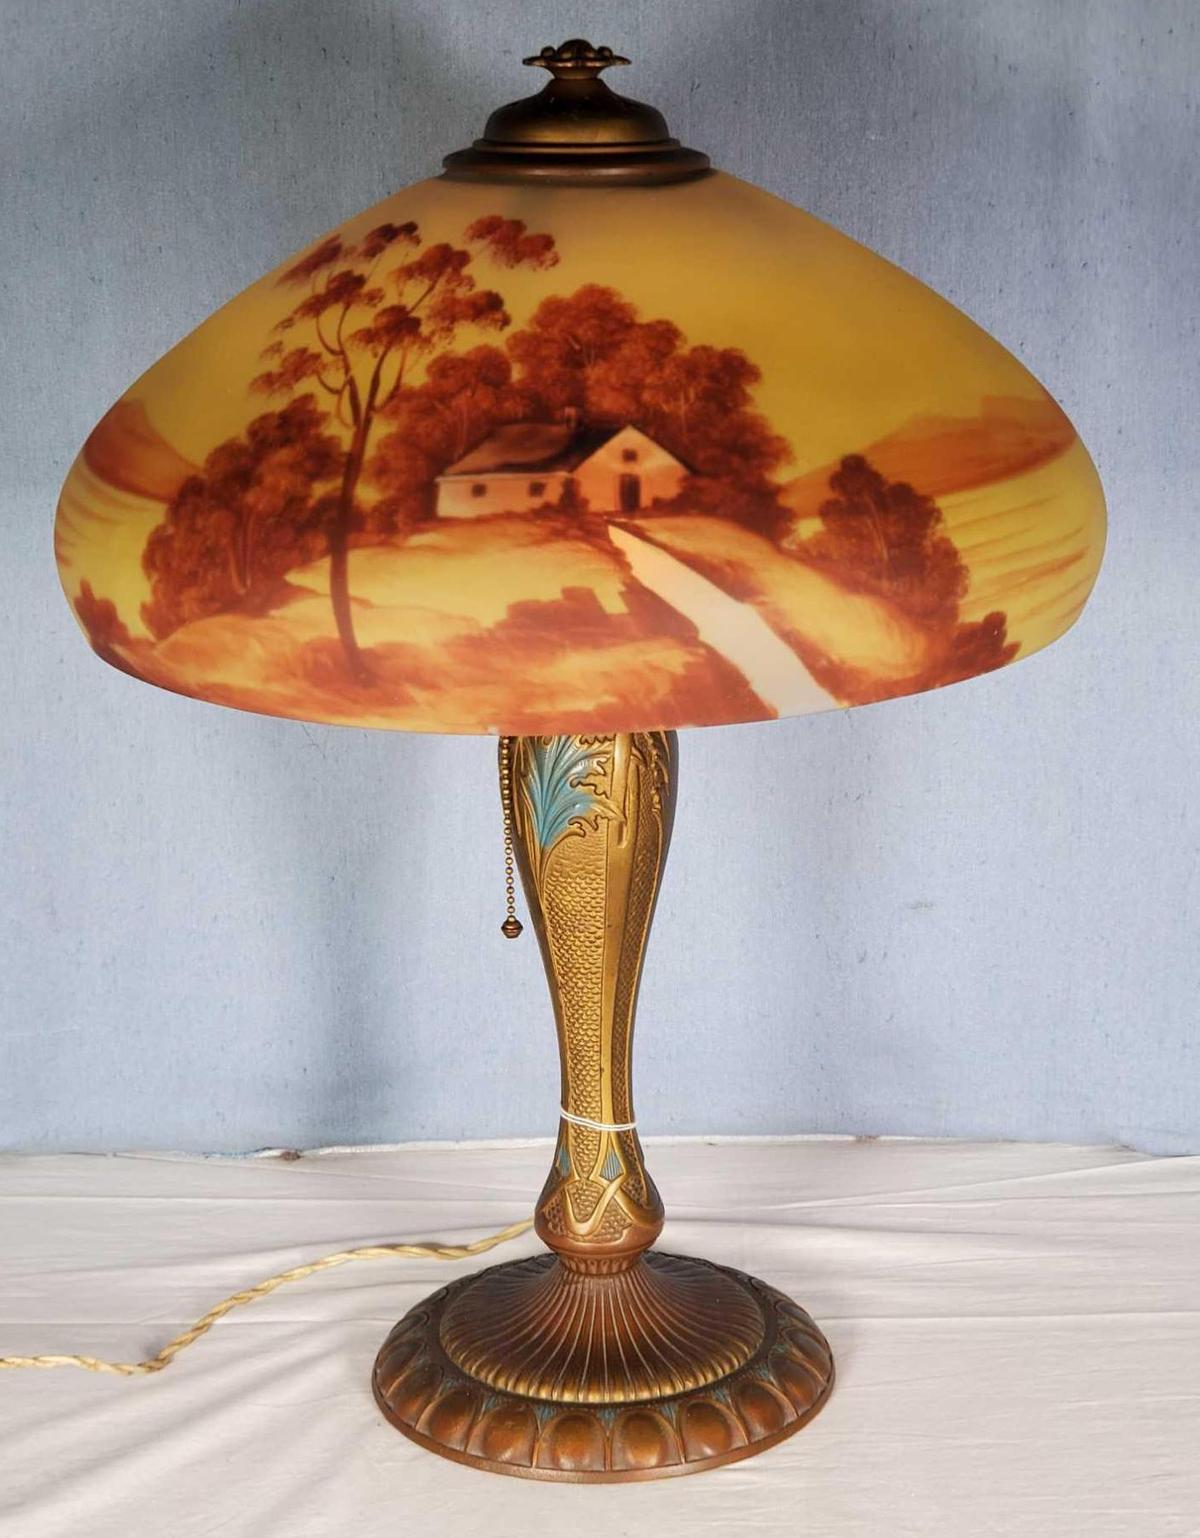 Hand Painted Antique Lamp with 16" Reverse Painted Landscape Glass Shade